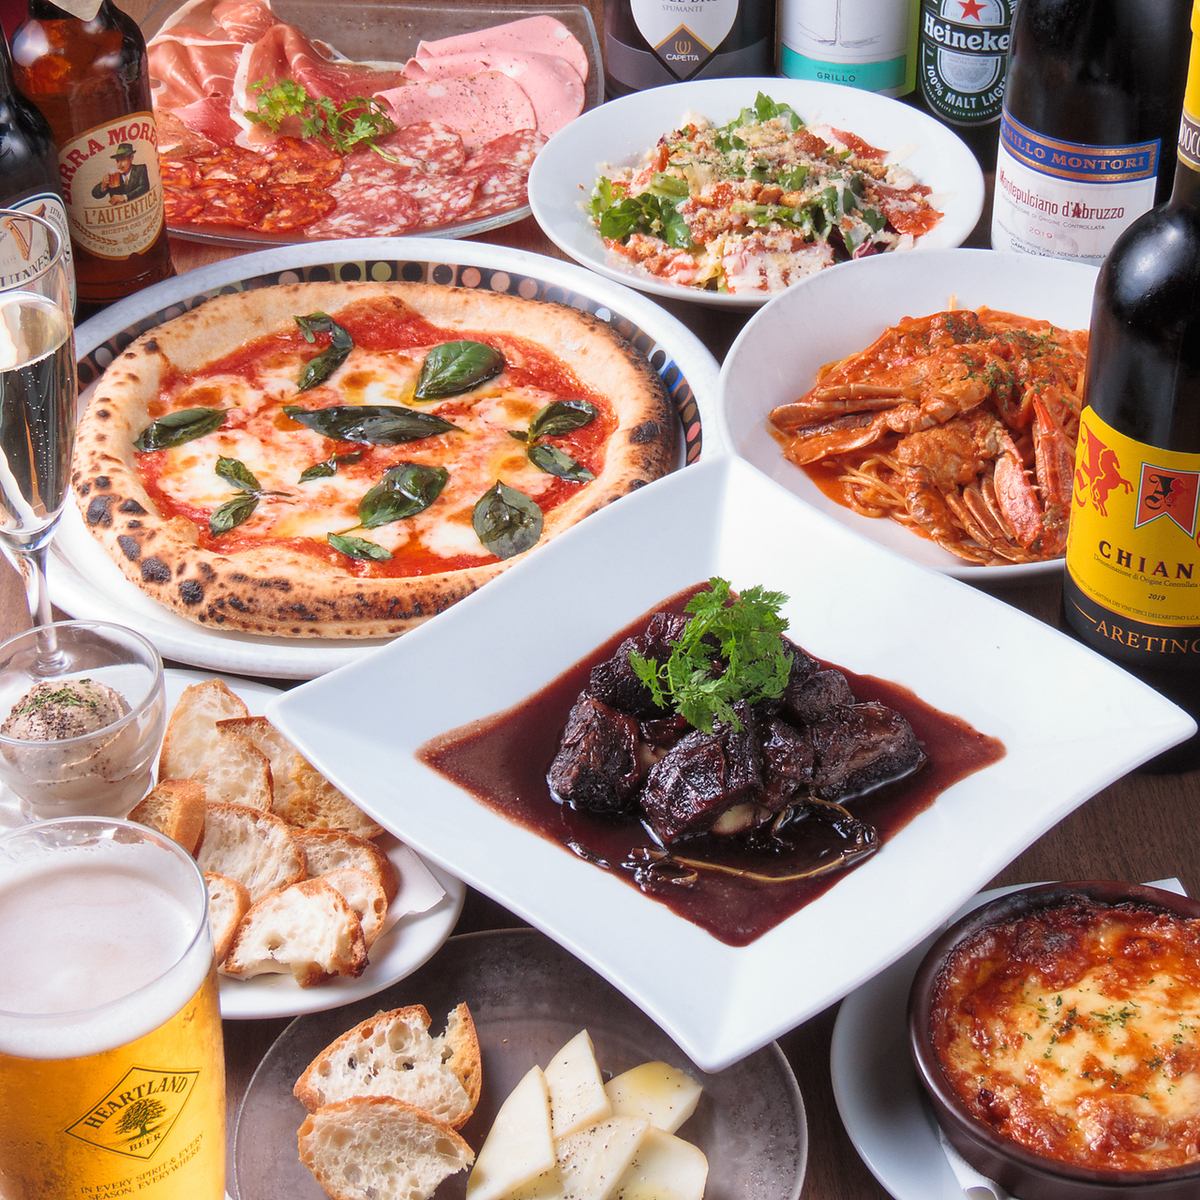 Enjoy authentic oven-baked pizza! Enjoy Italian food at a reasonable price♪